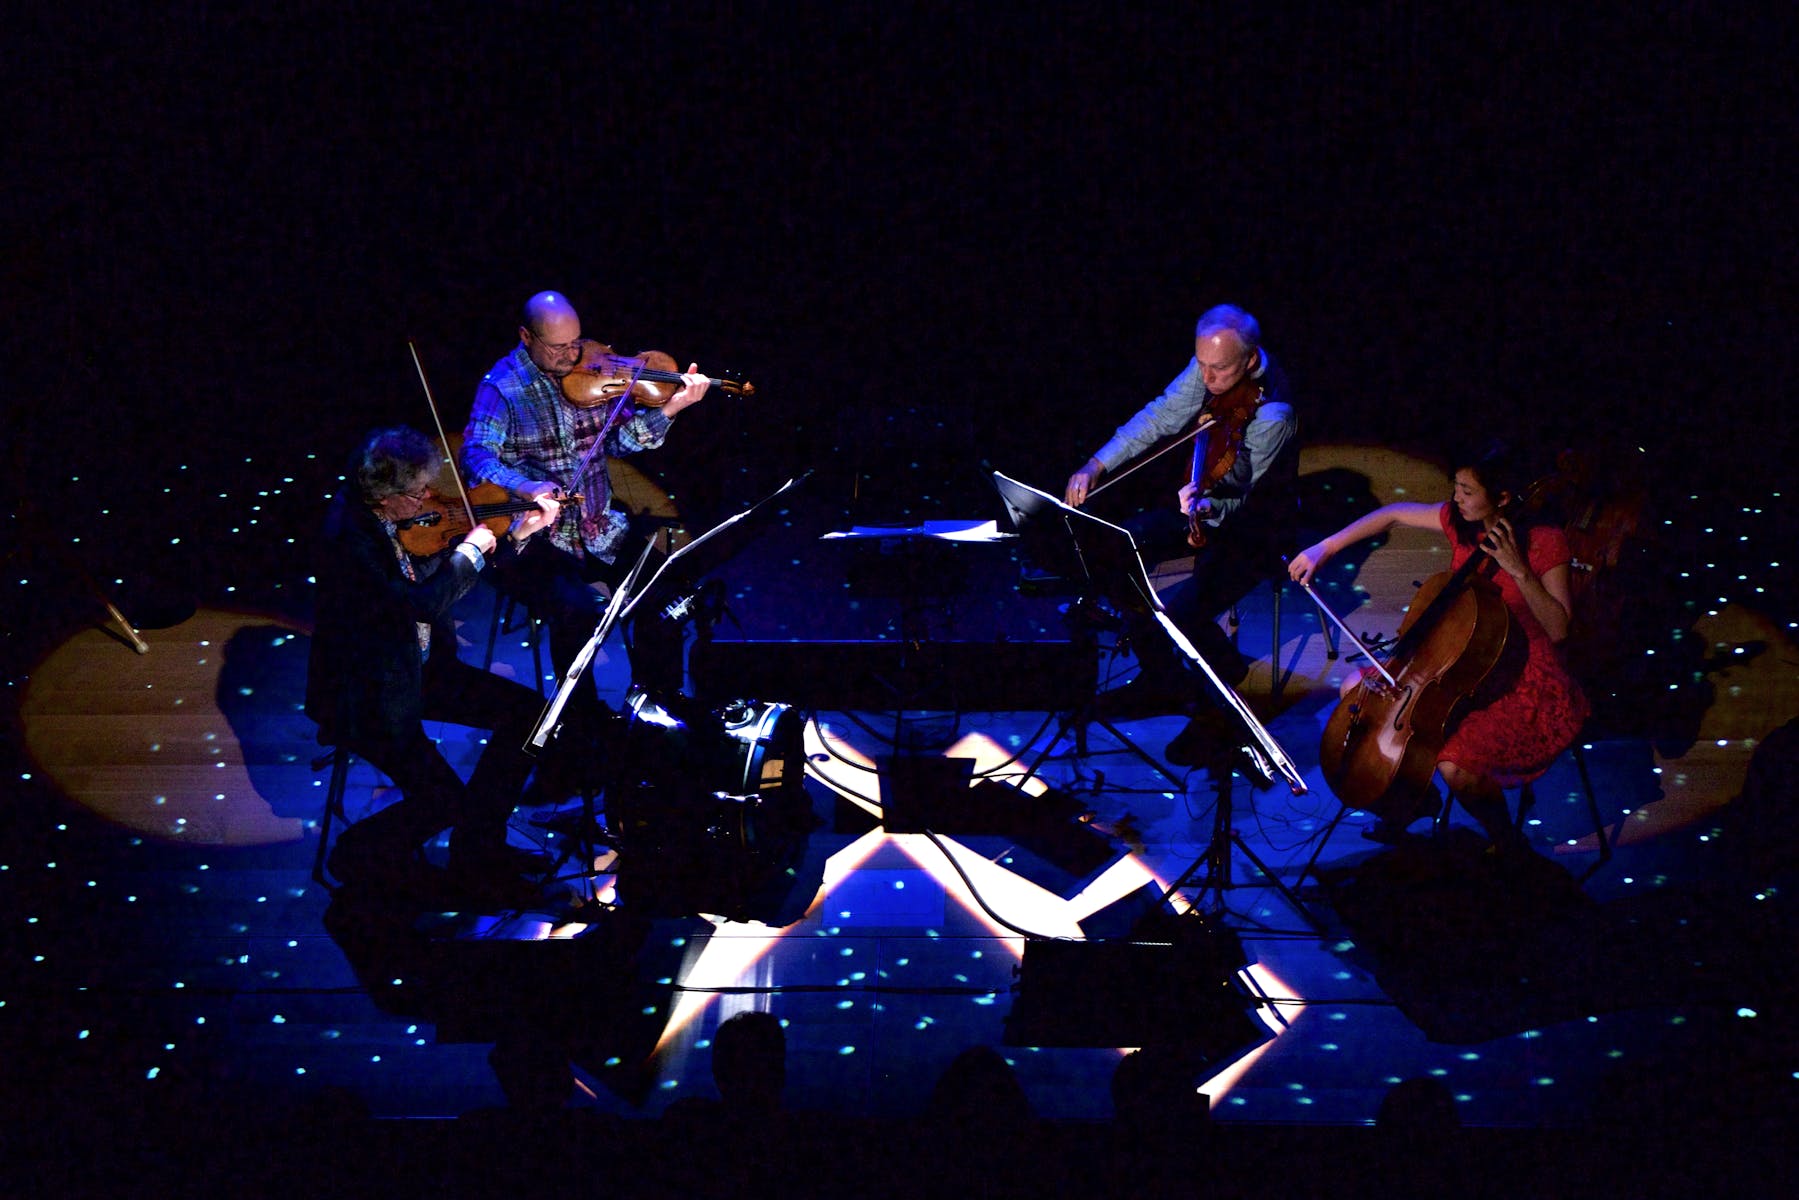 Four musicians on stage facing inwards with star-like lighting